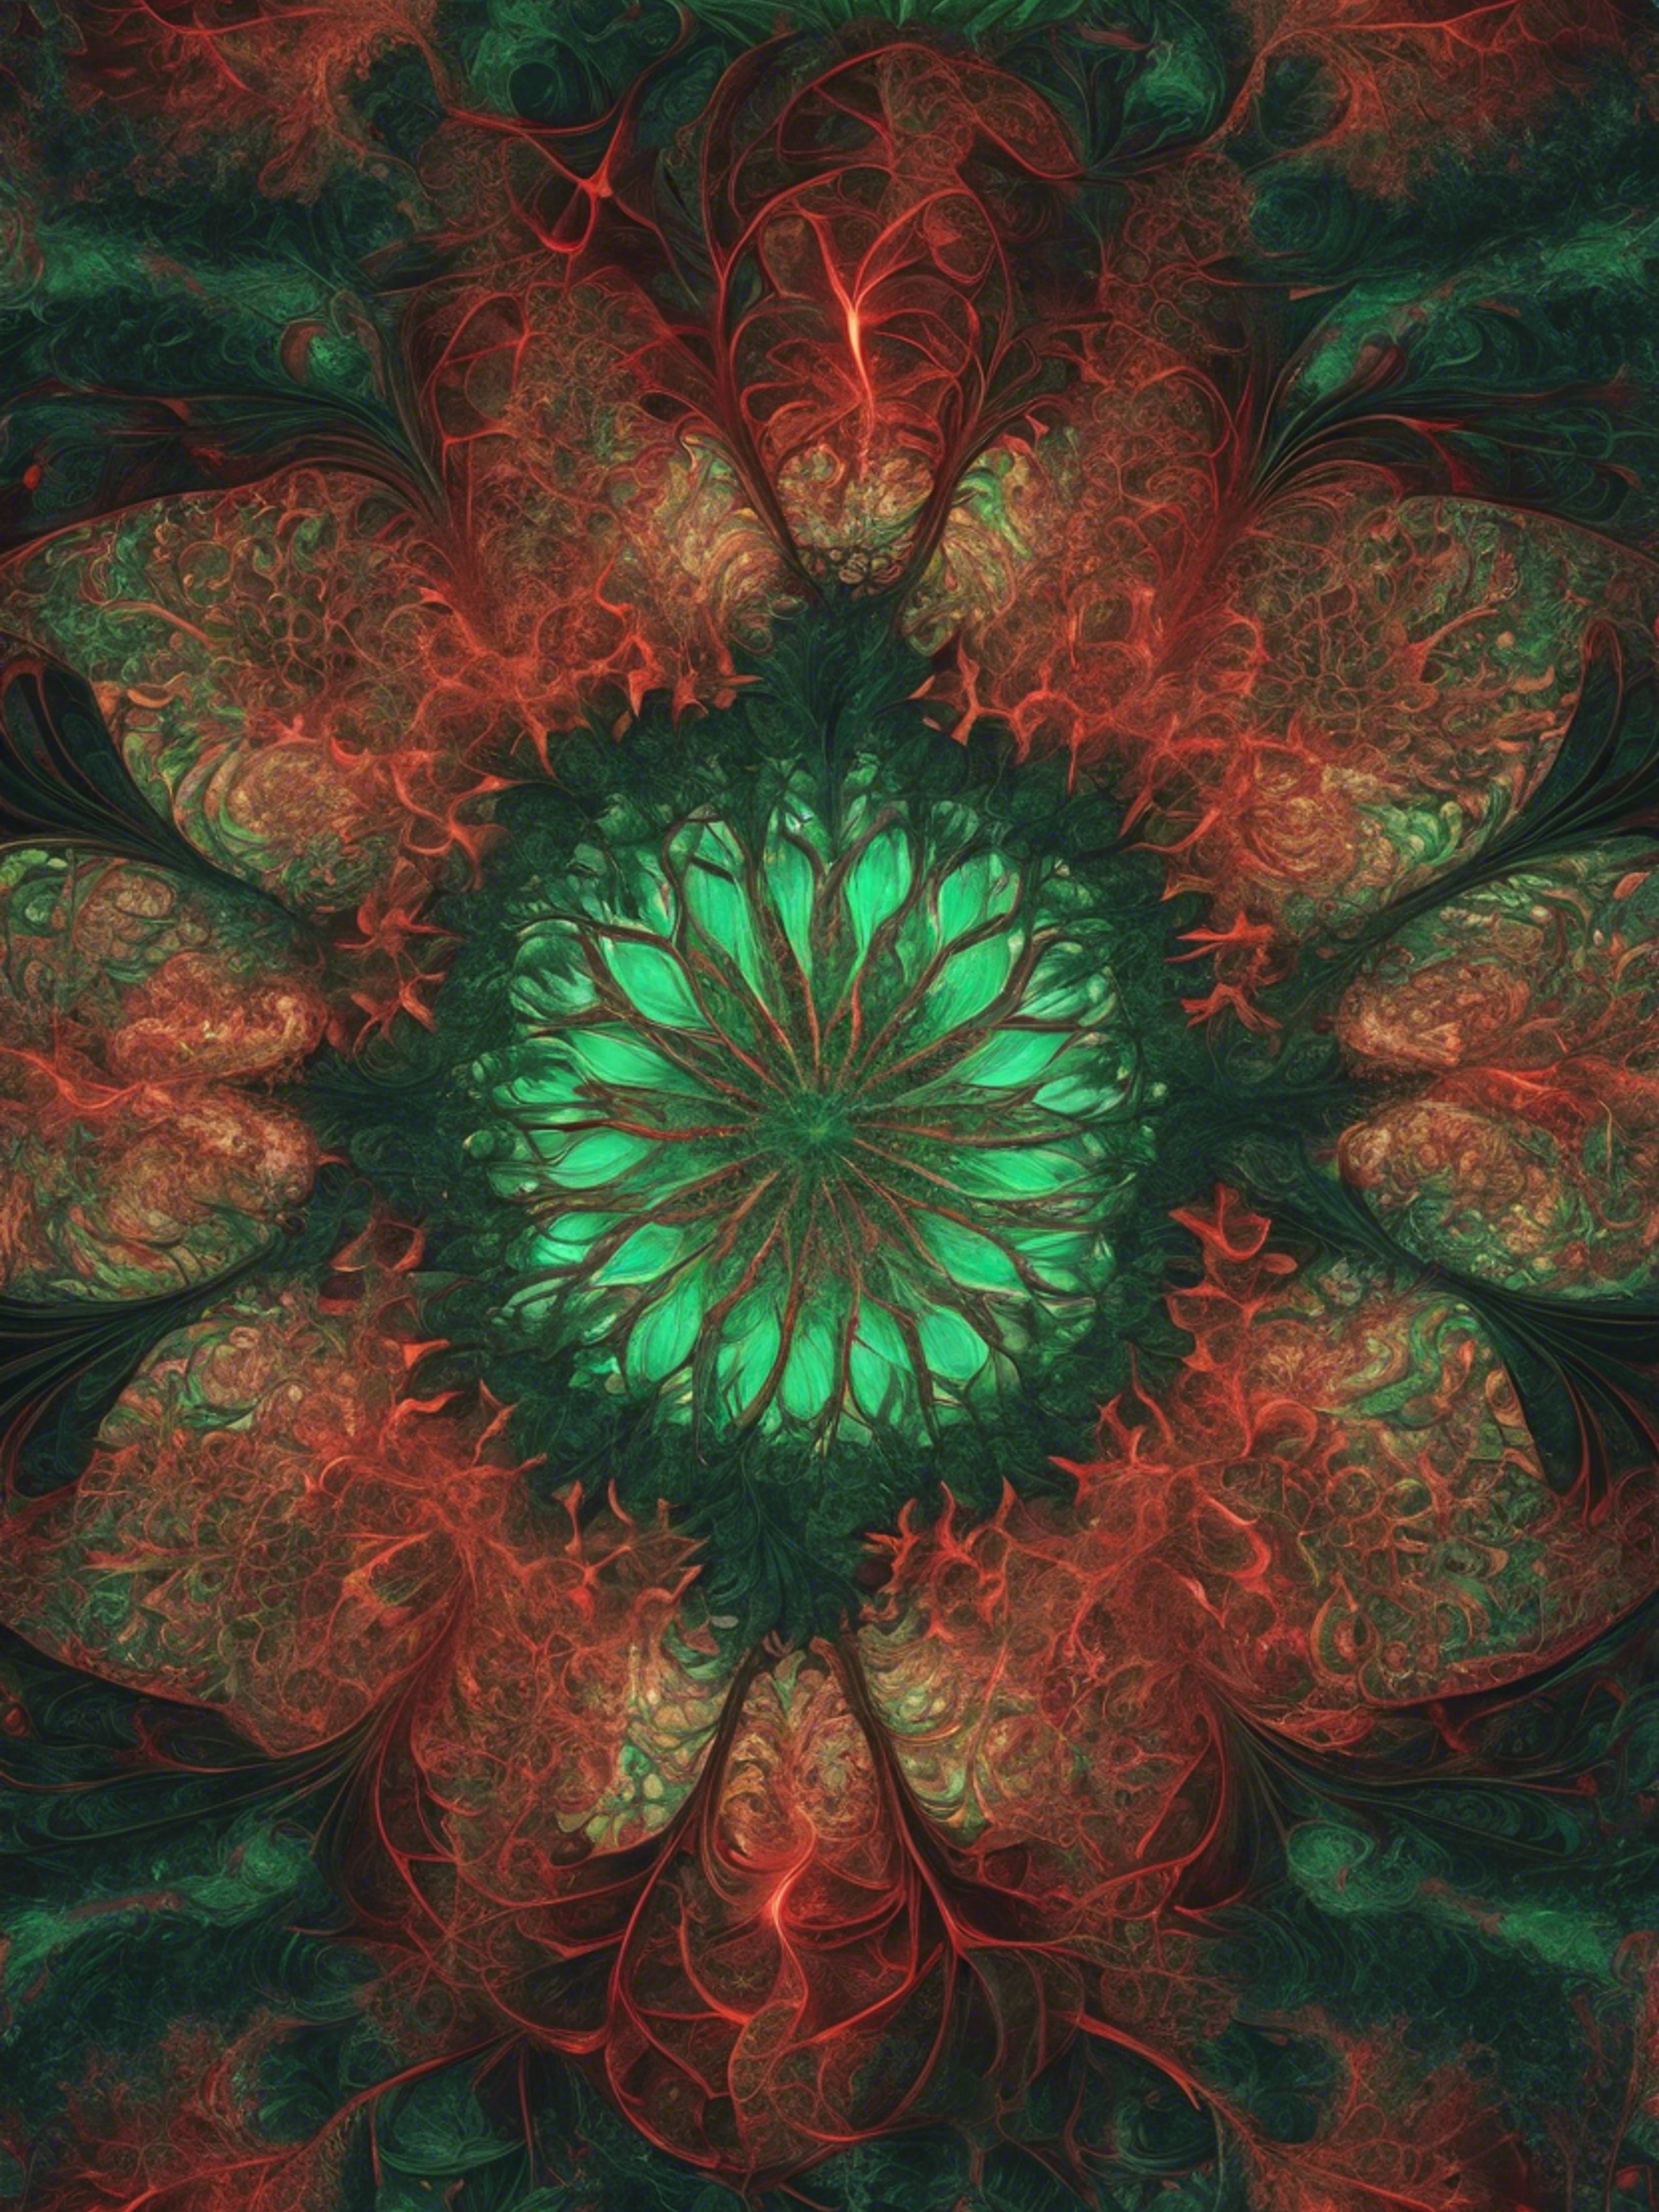 Intricate fractal patterns composed of alternating red and green hues 벽지[0376ed7744fd4b80a9ab]